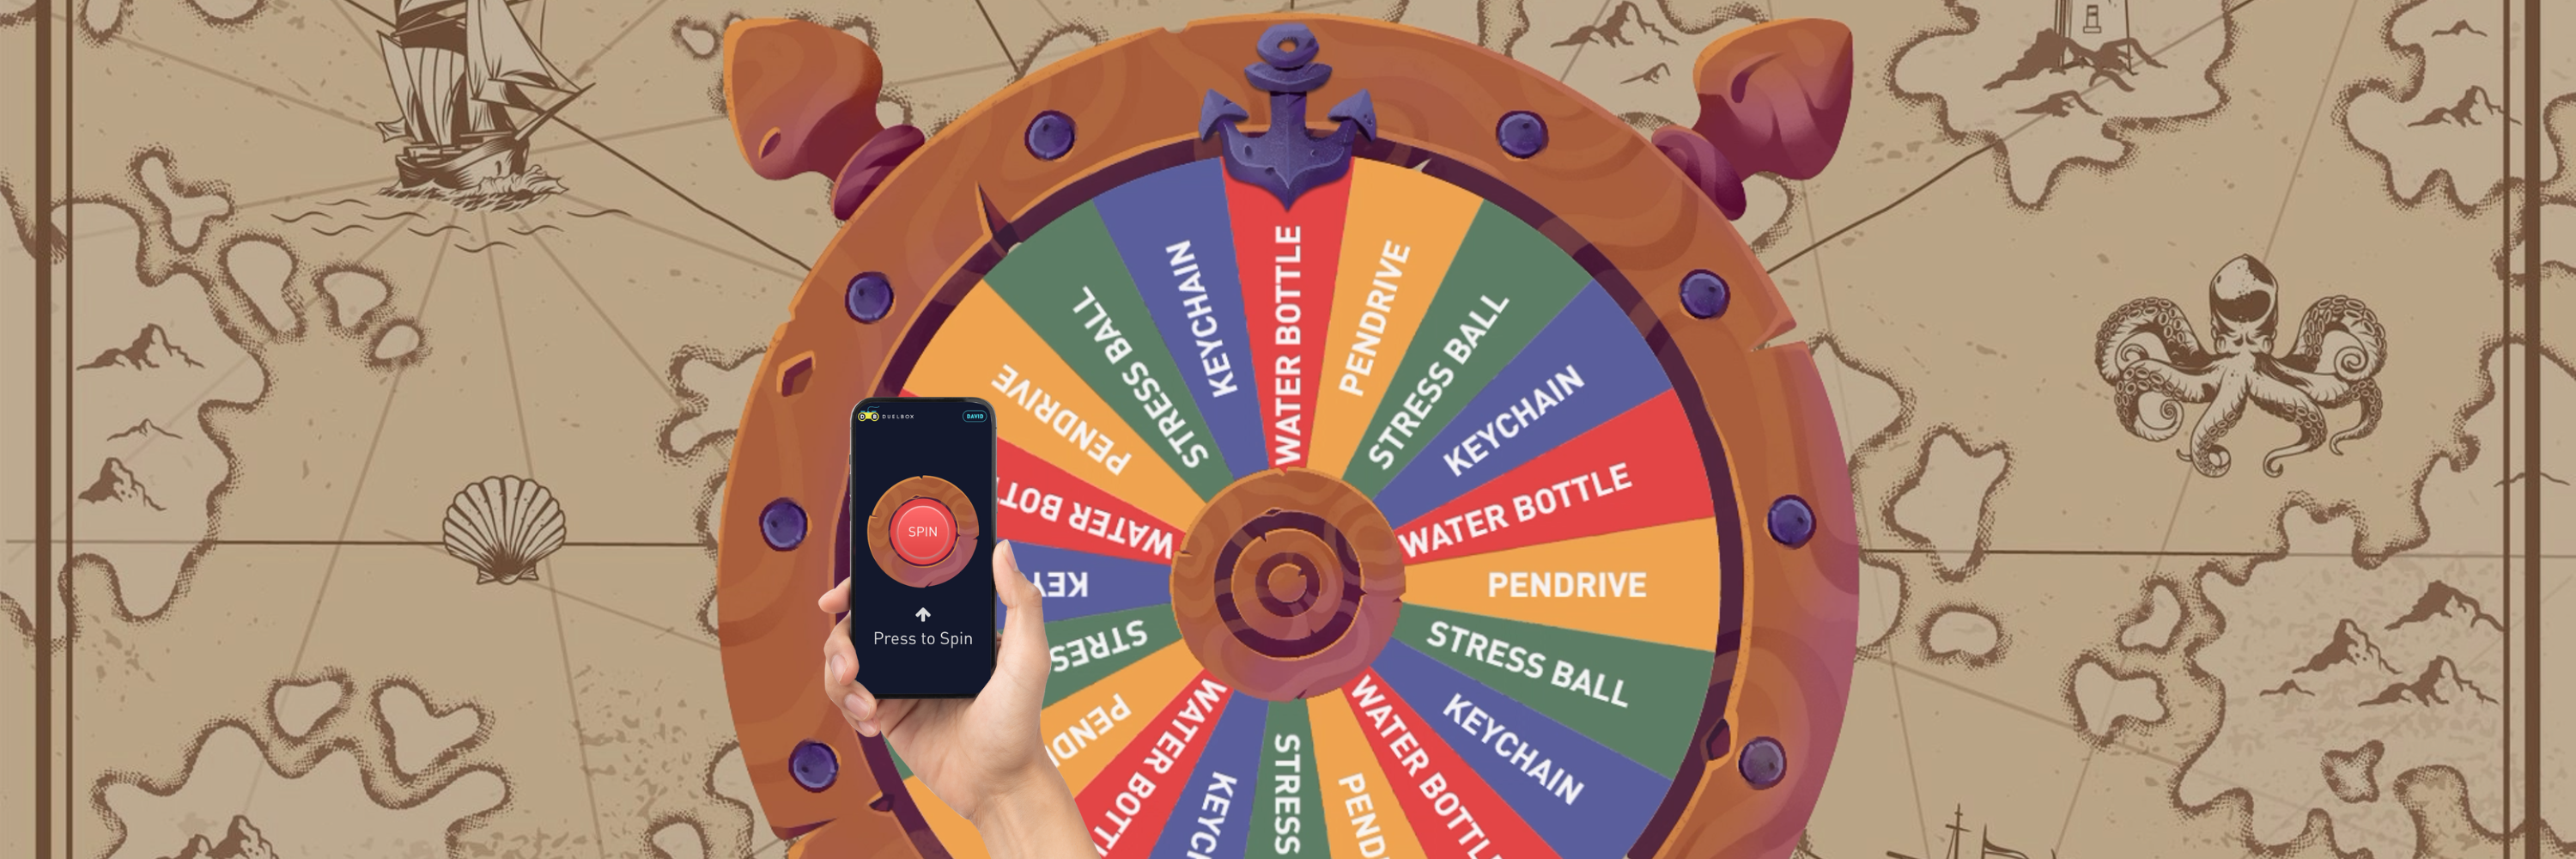 Pirate themed digital spin wheel